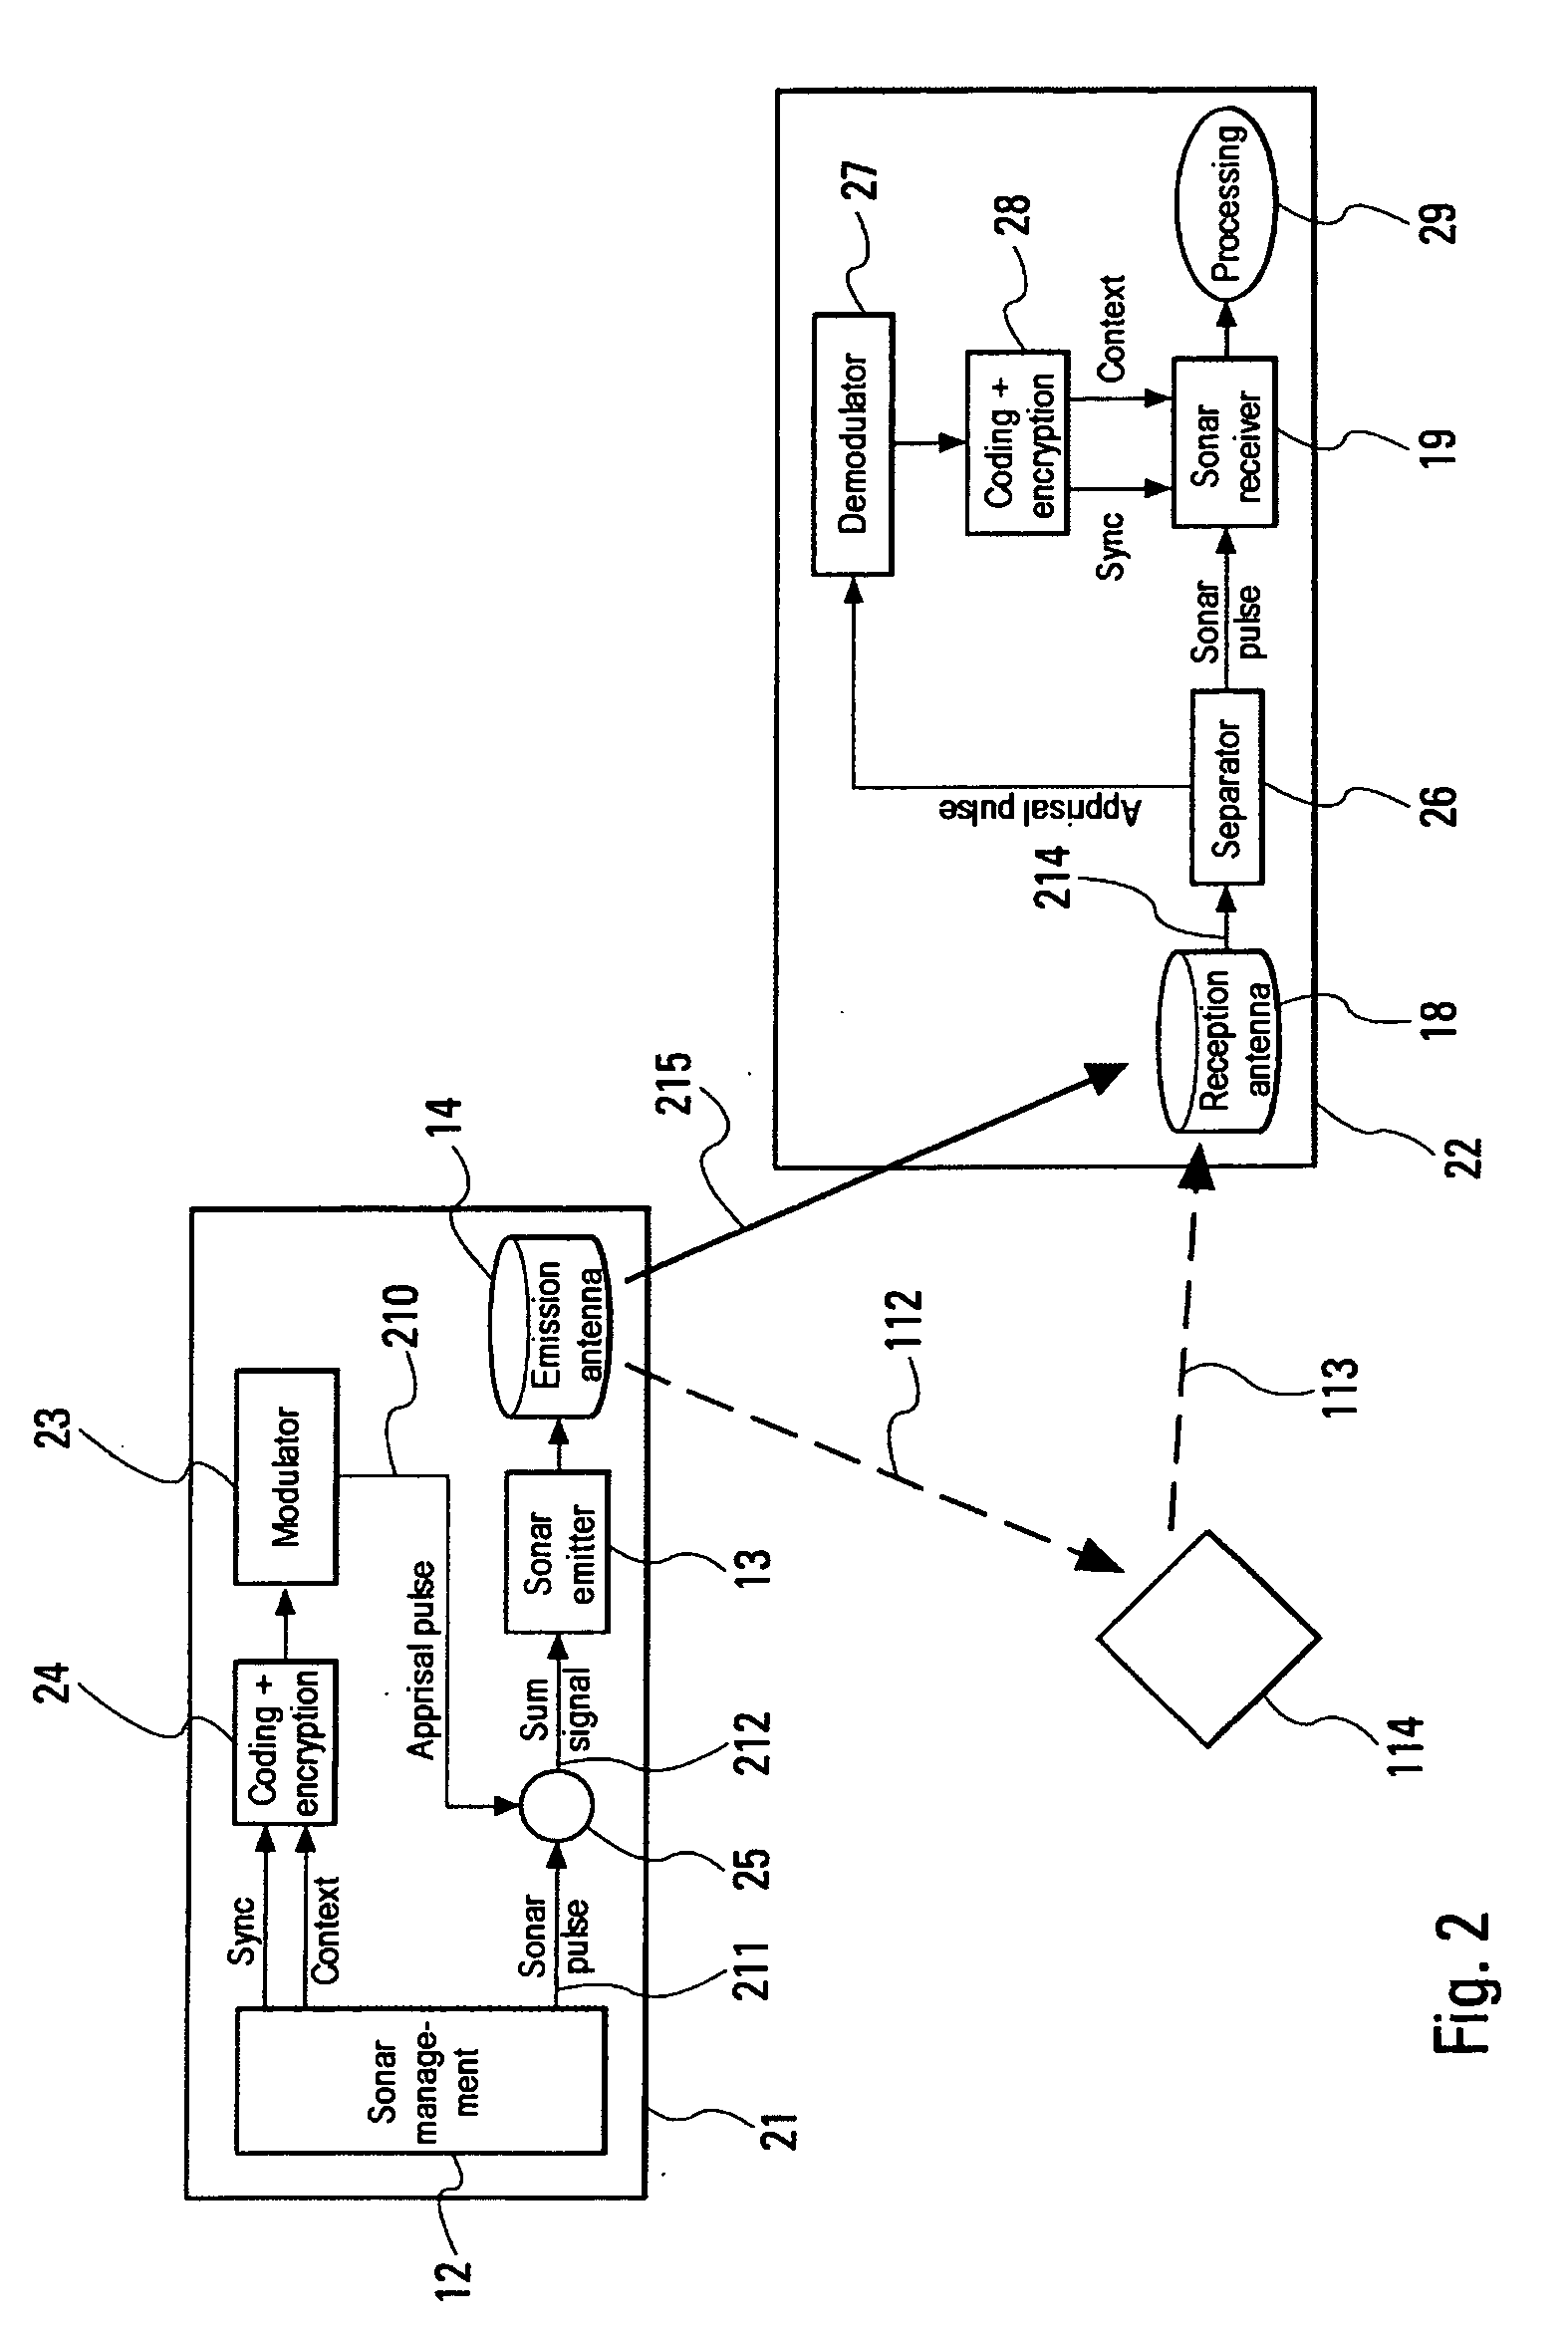 Architecture of an acoustic multistatic system